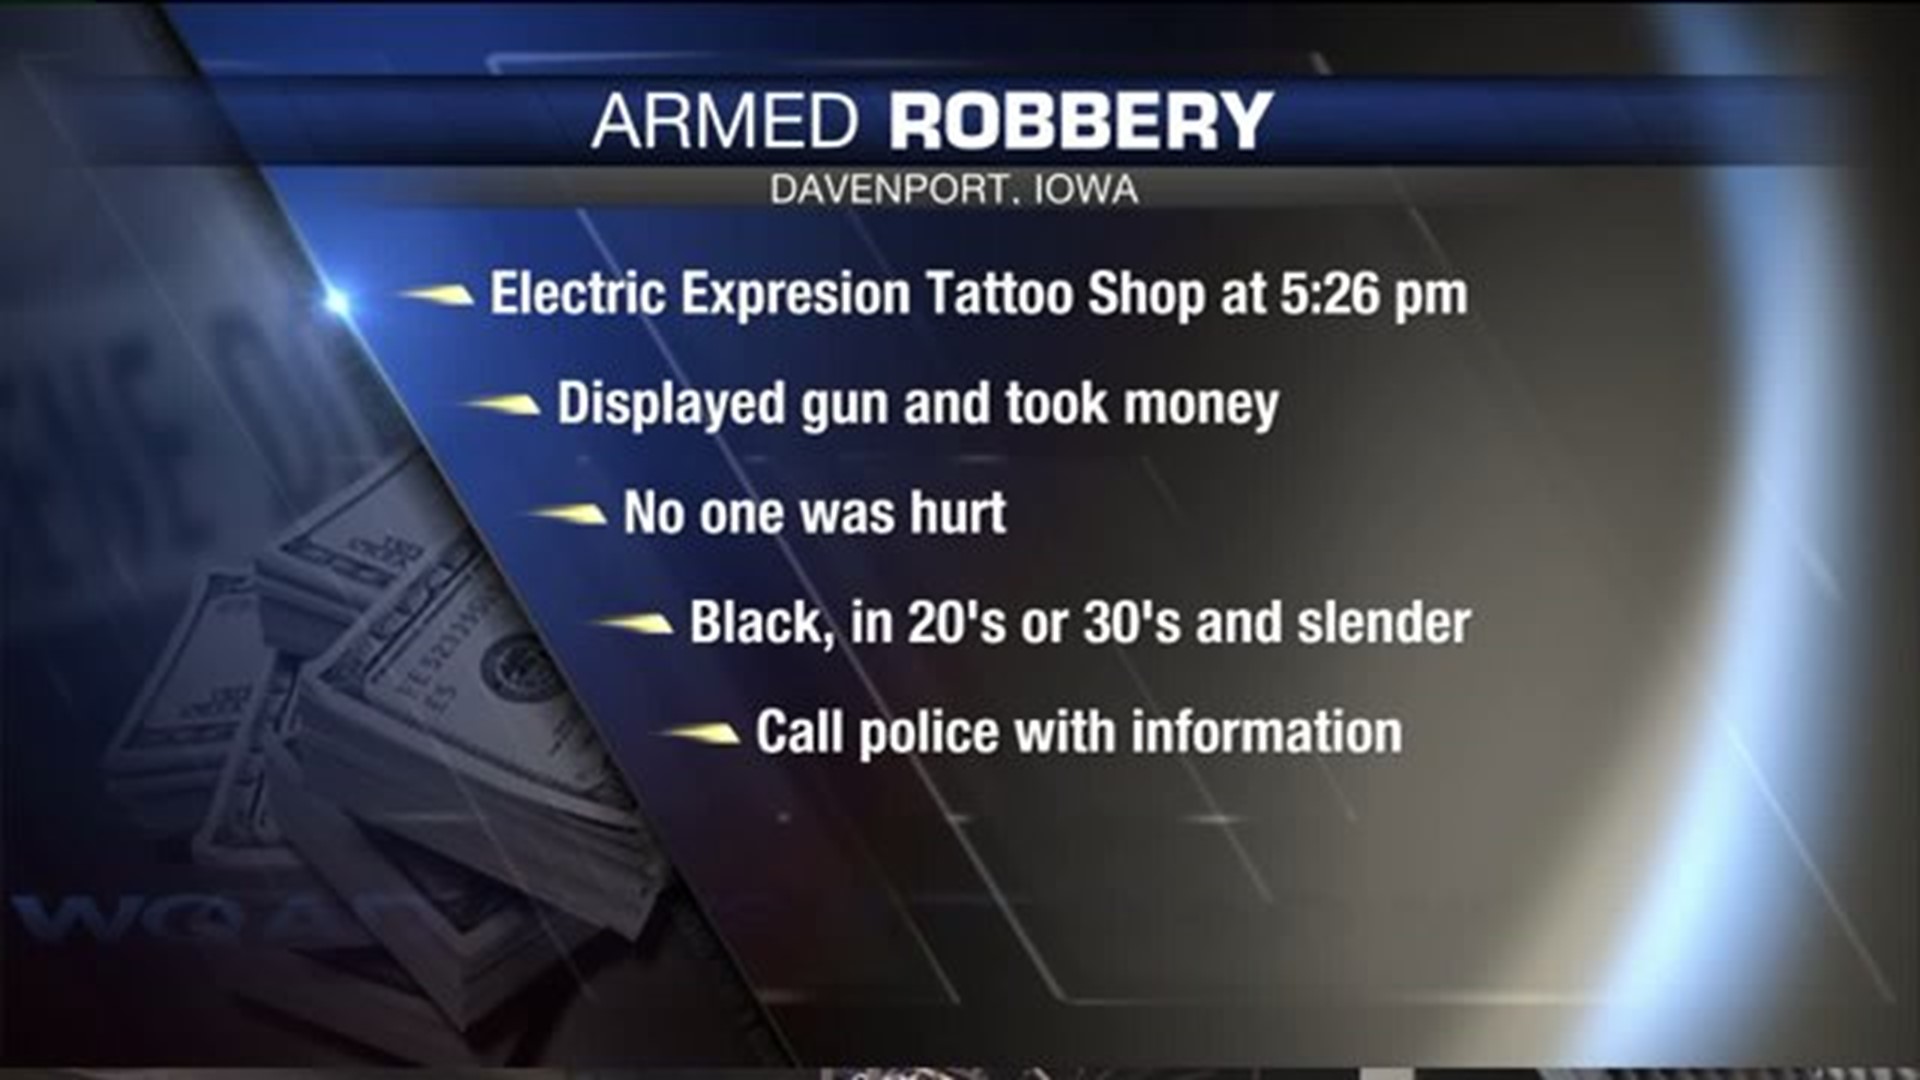 Police searching for suspect in Davenport armed robbery